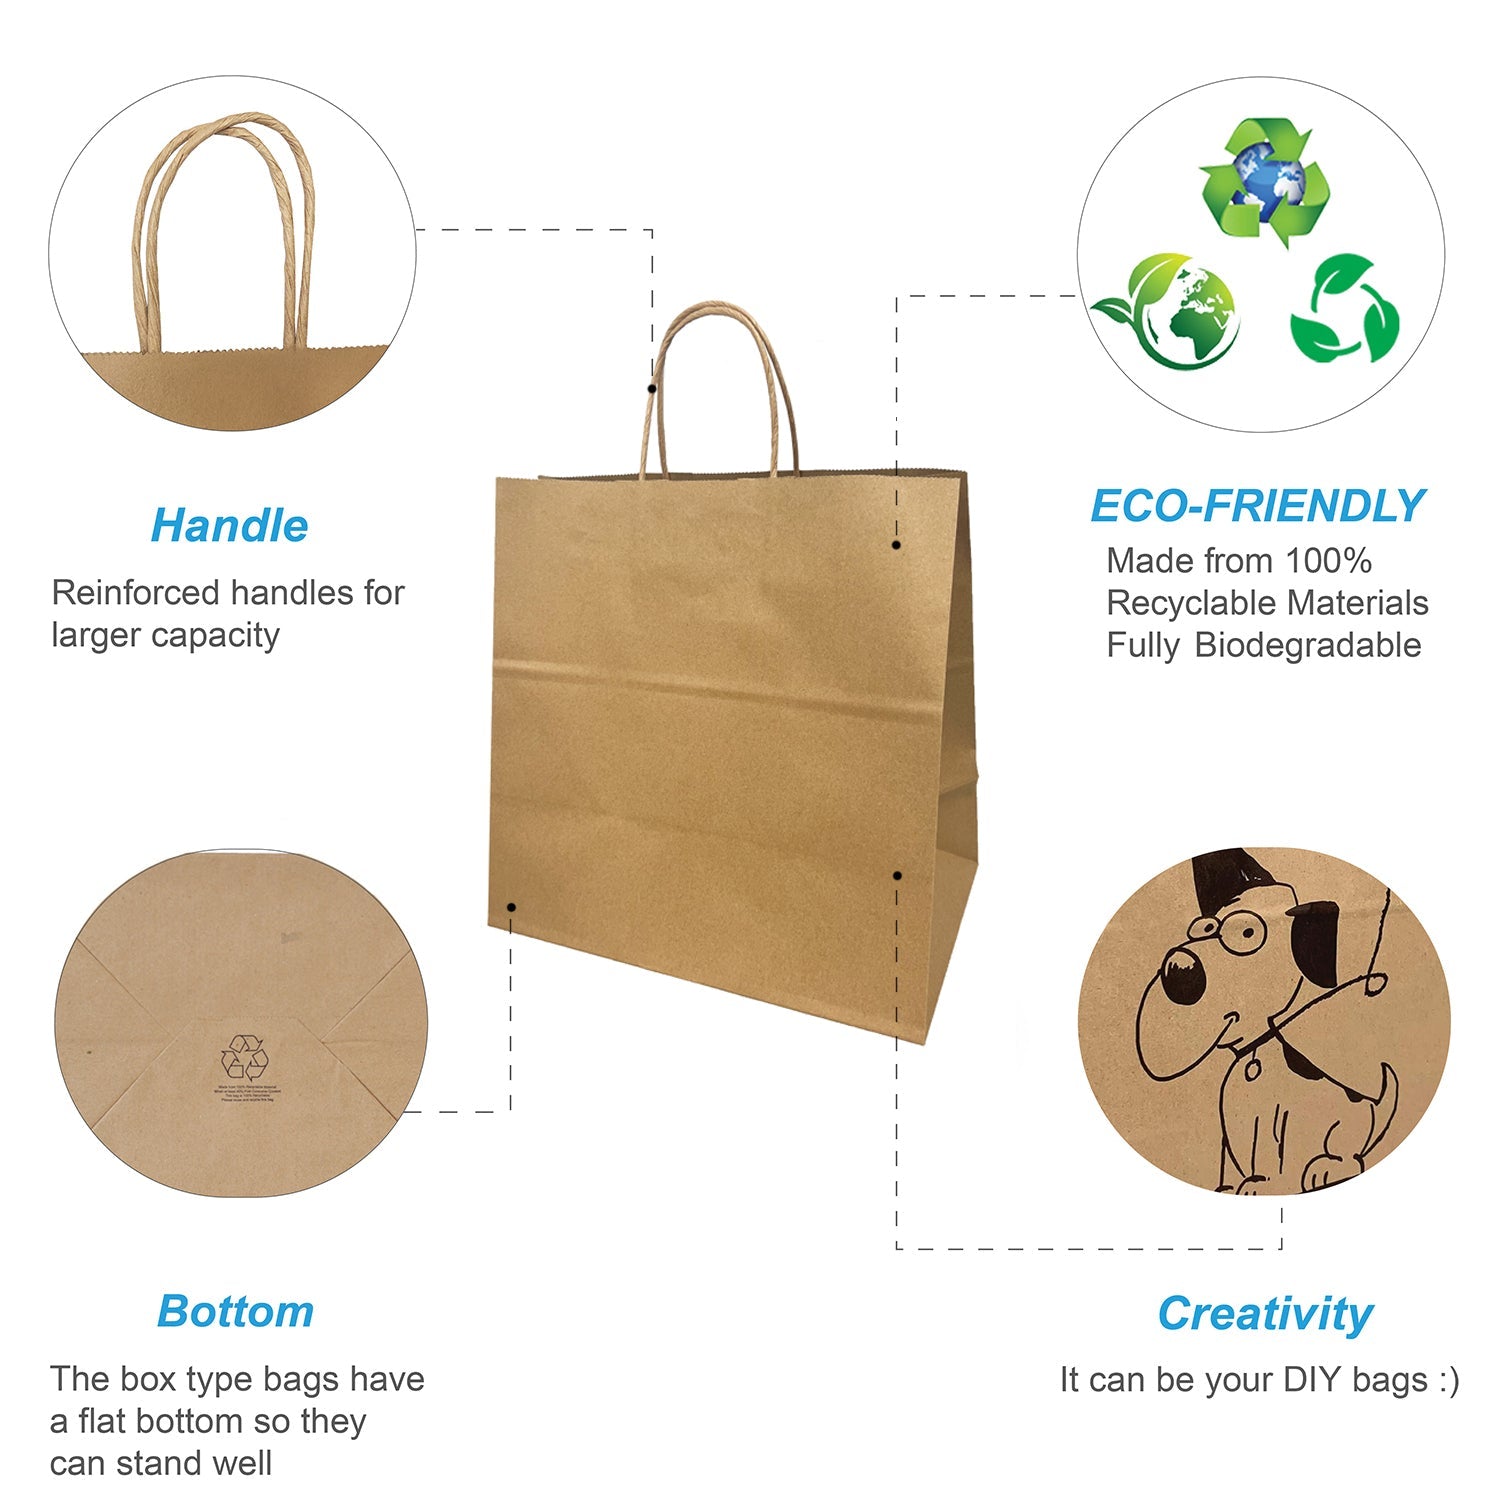 250 Pcs, Pluto, 12x7x12 inches, Kraft Paper Bags, with Twisted Handle